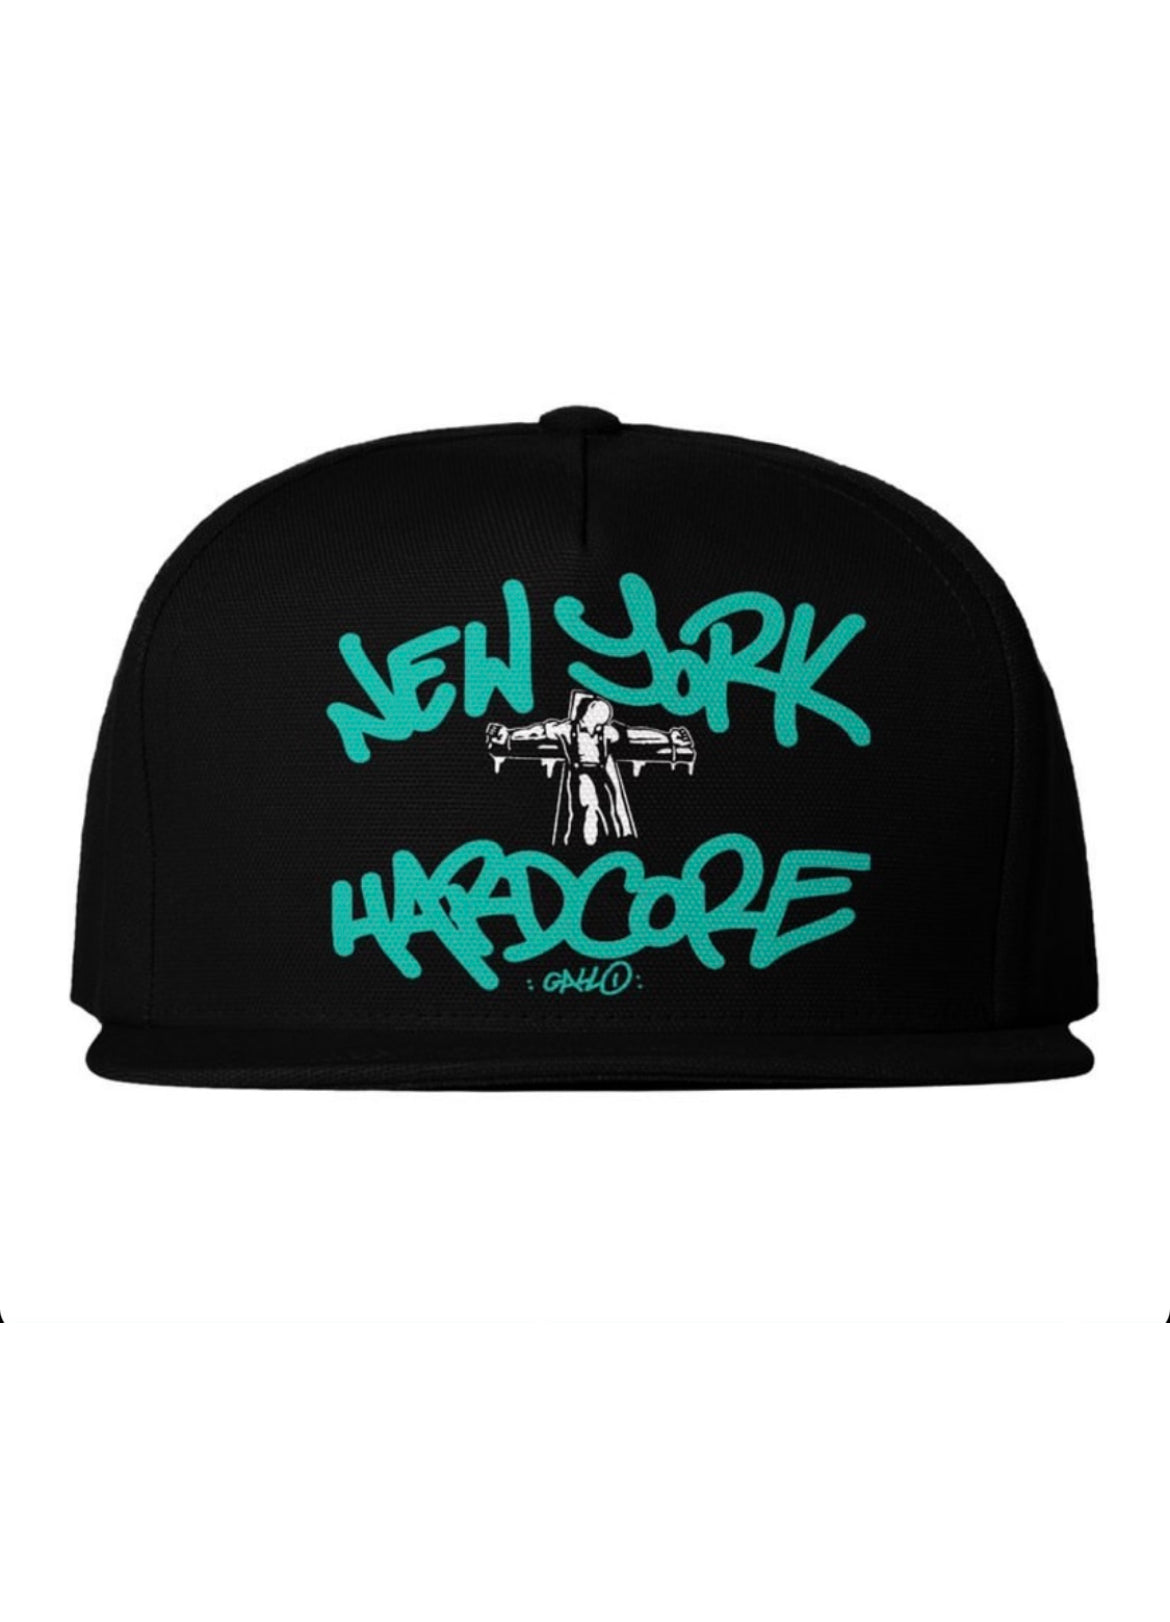 Exclusive - Crucified NYHC Hat